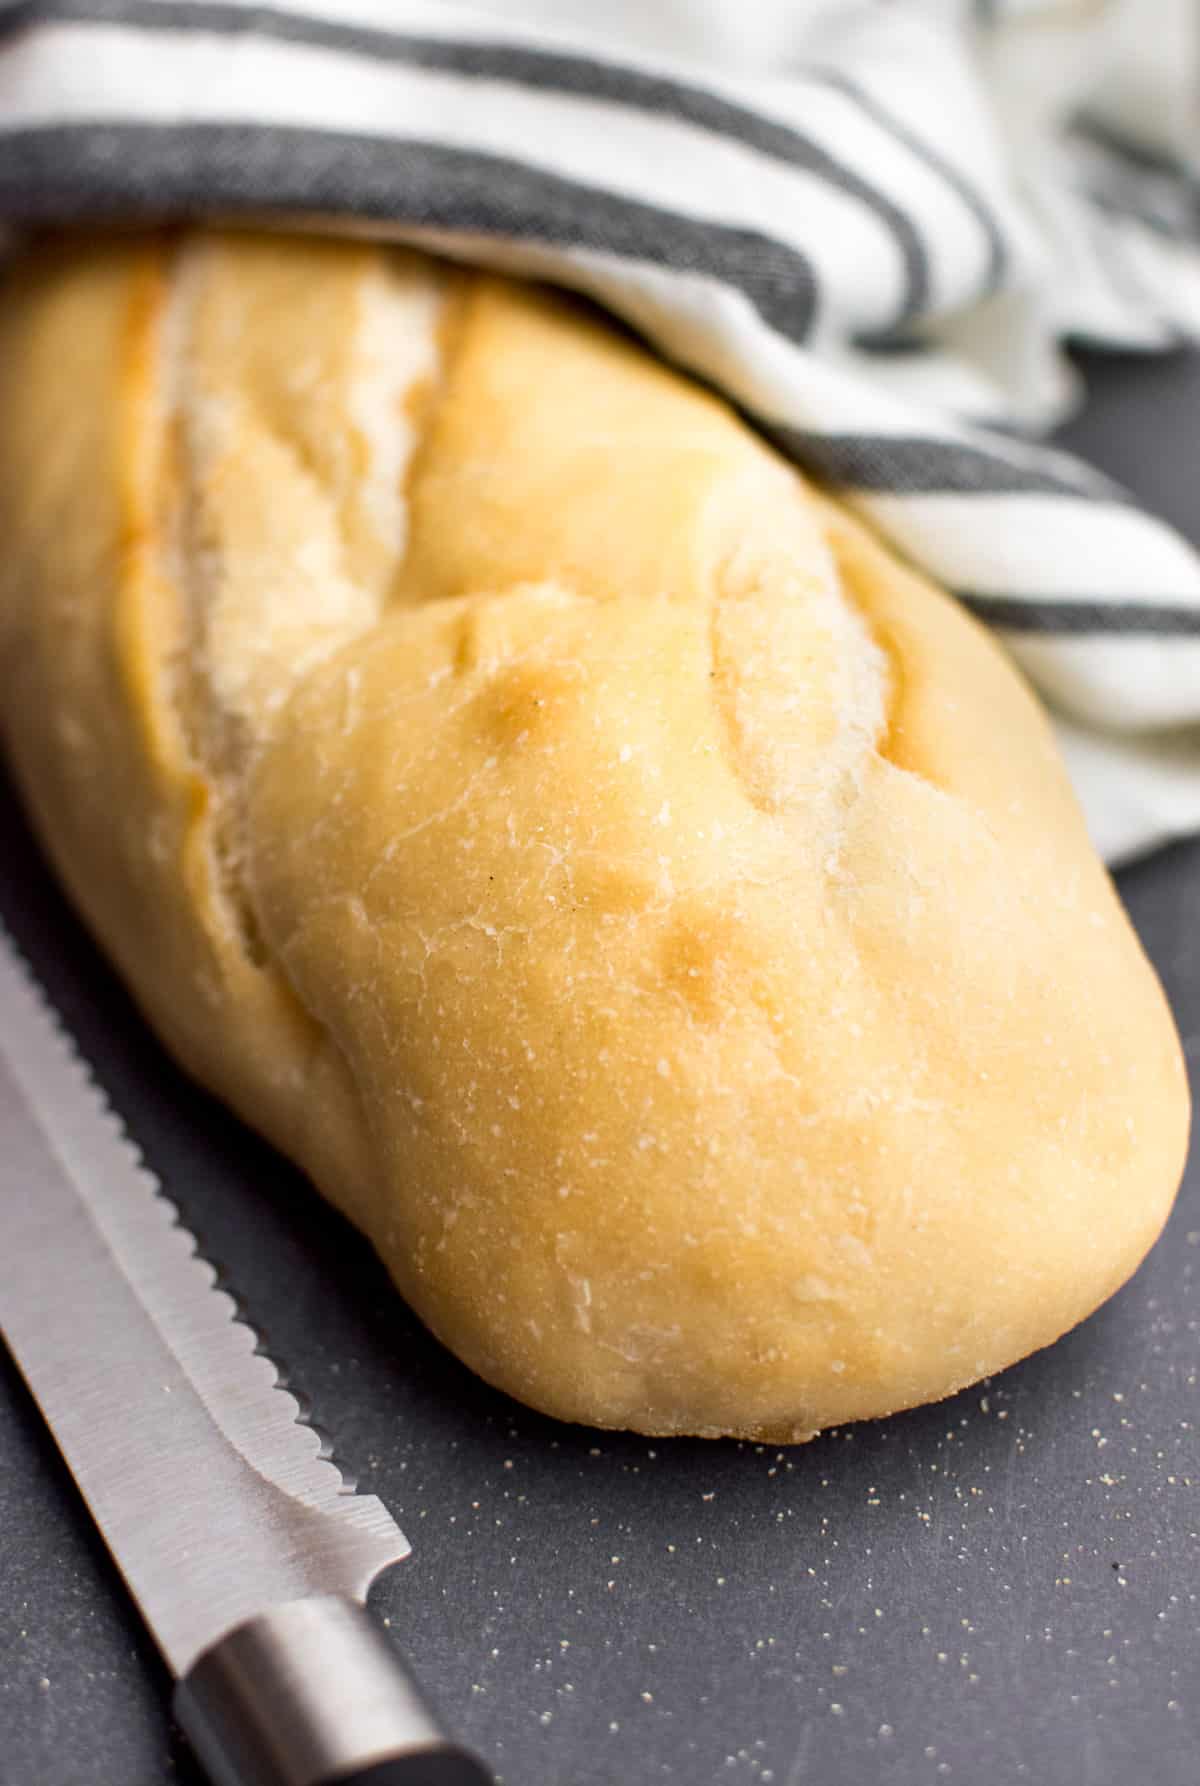 A loaf of french bread on a dark surface with a white and gray striped towel and bread knife.